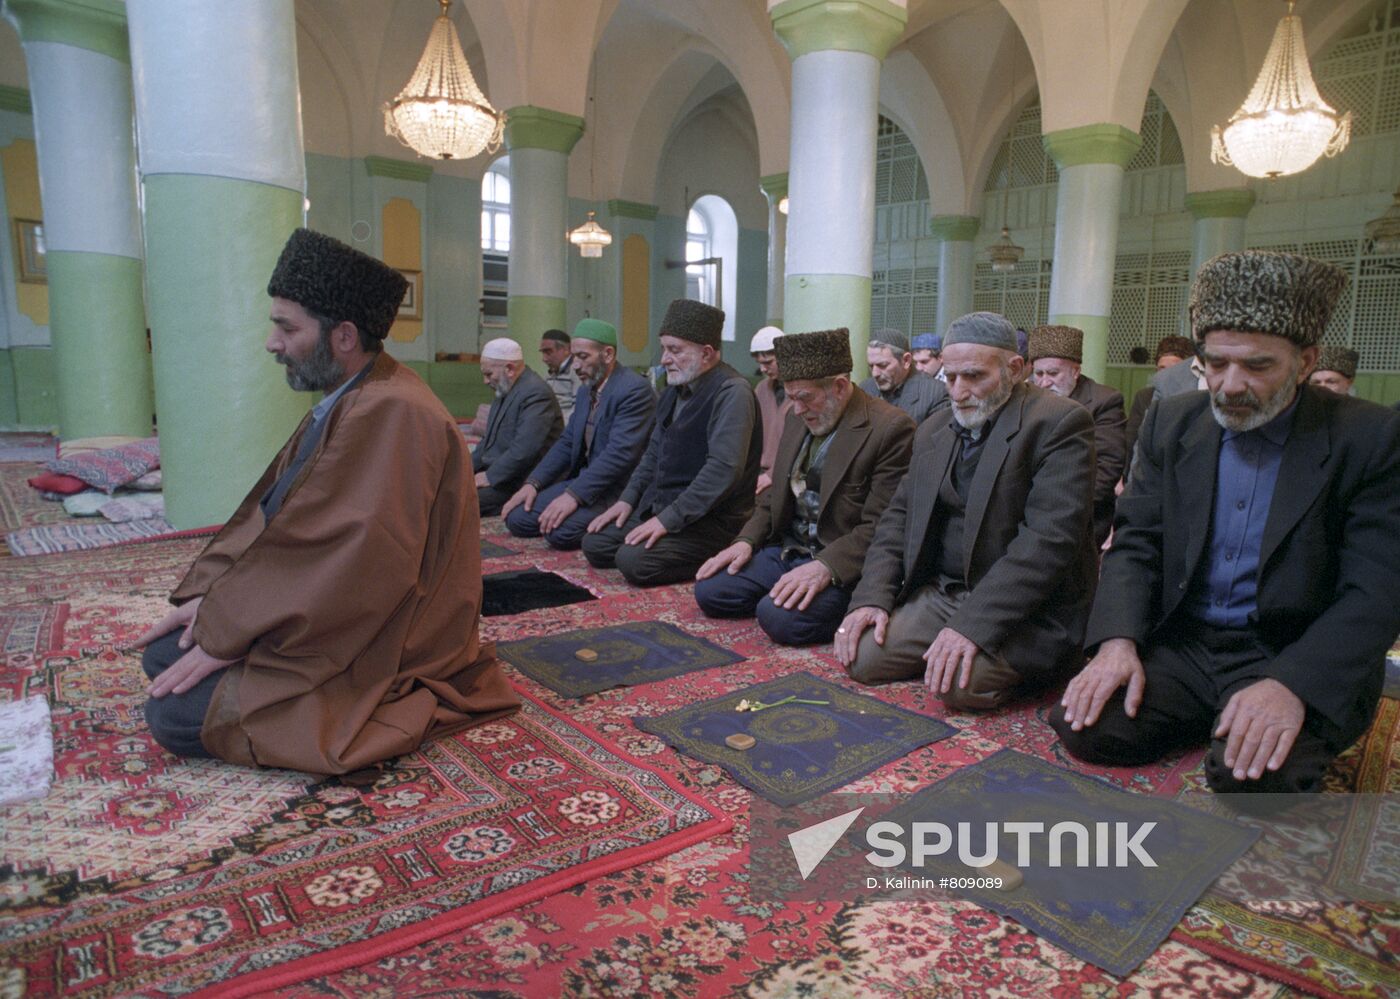 Prayer at a renovated mosque